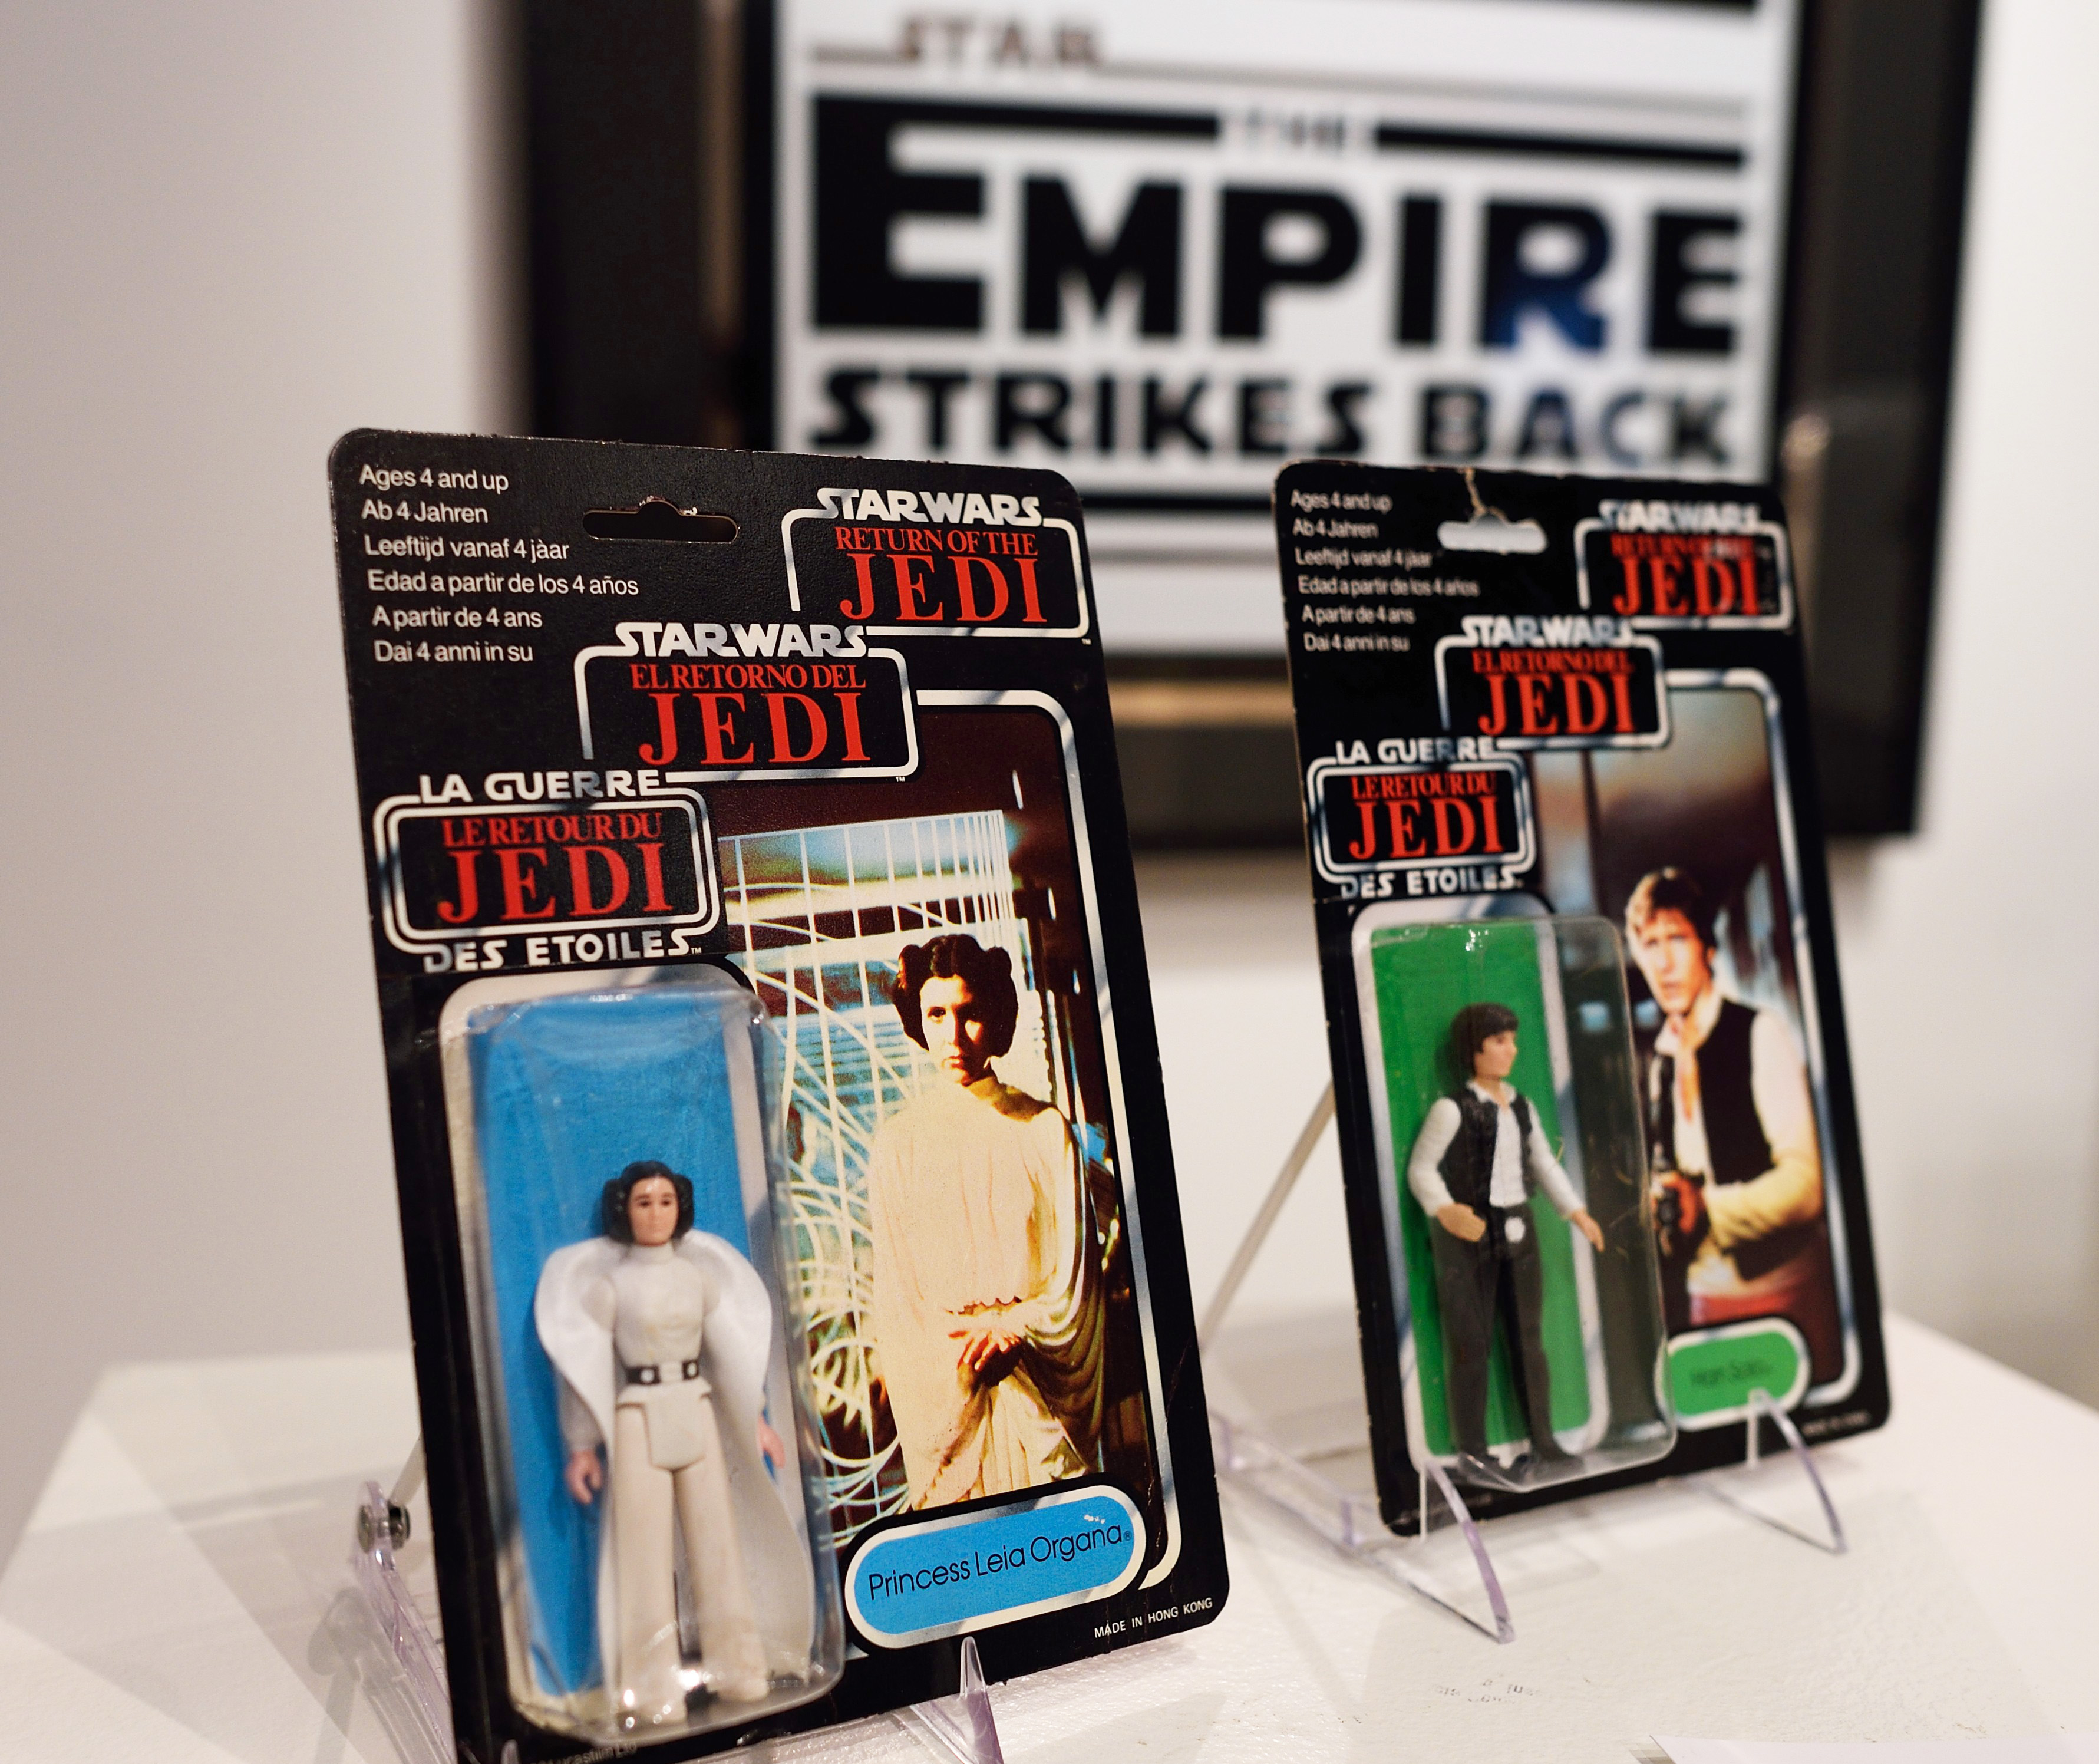 Princess Leia and Han Solo action figures wait to be auctioned at Sotheby's in New York City on Dec. 2, 2015.